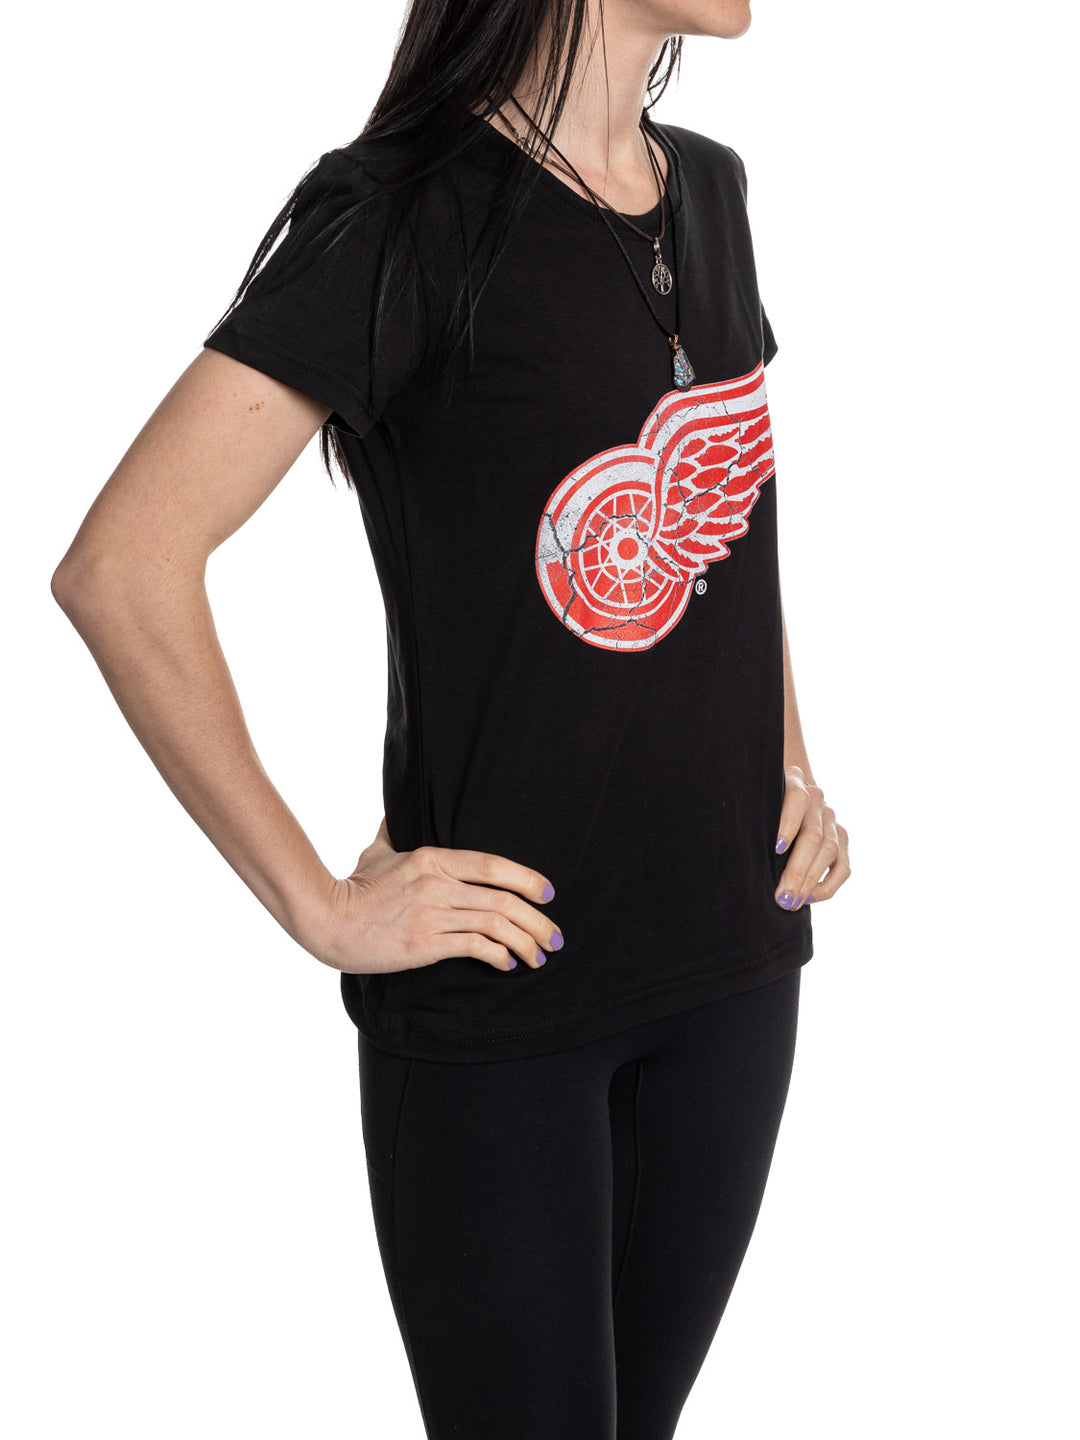 Detroit Red Wings Women's Distressed Print Fitted Crew Neck Premium T-Shirt - Black